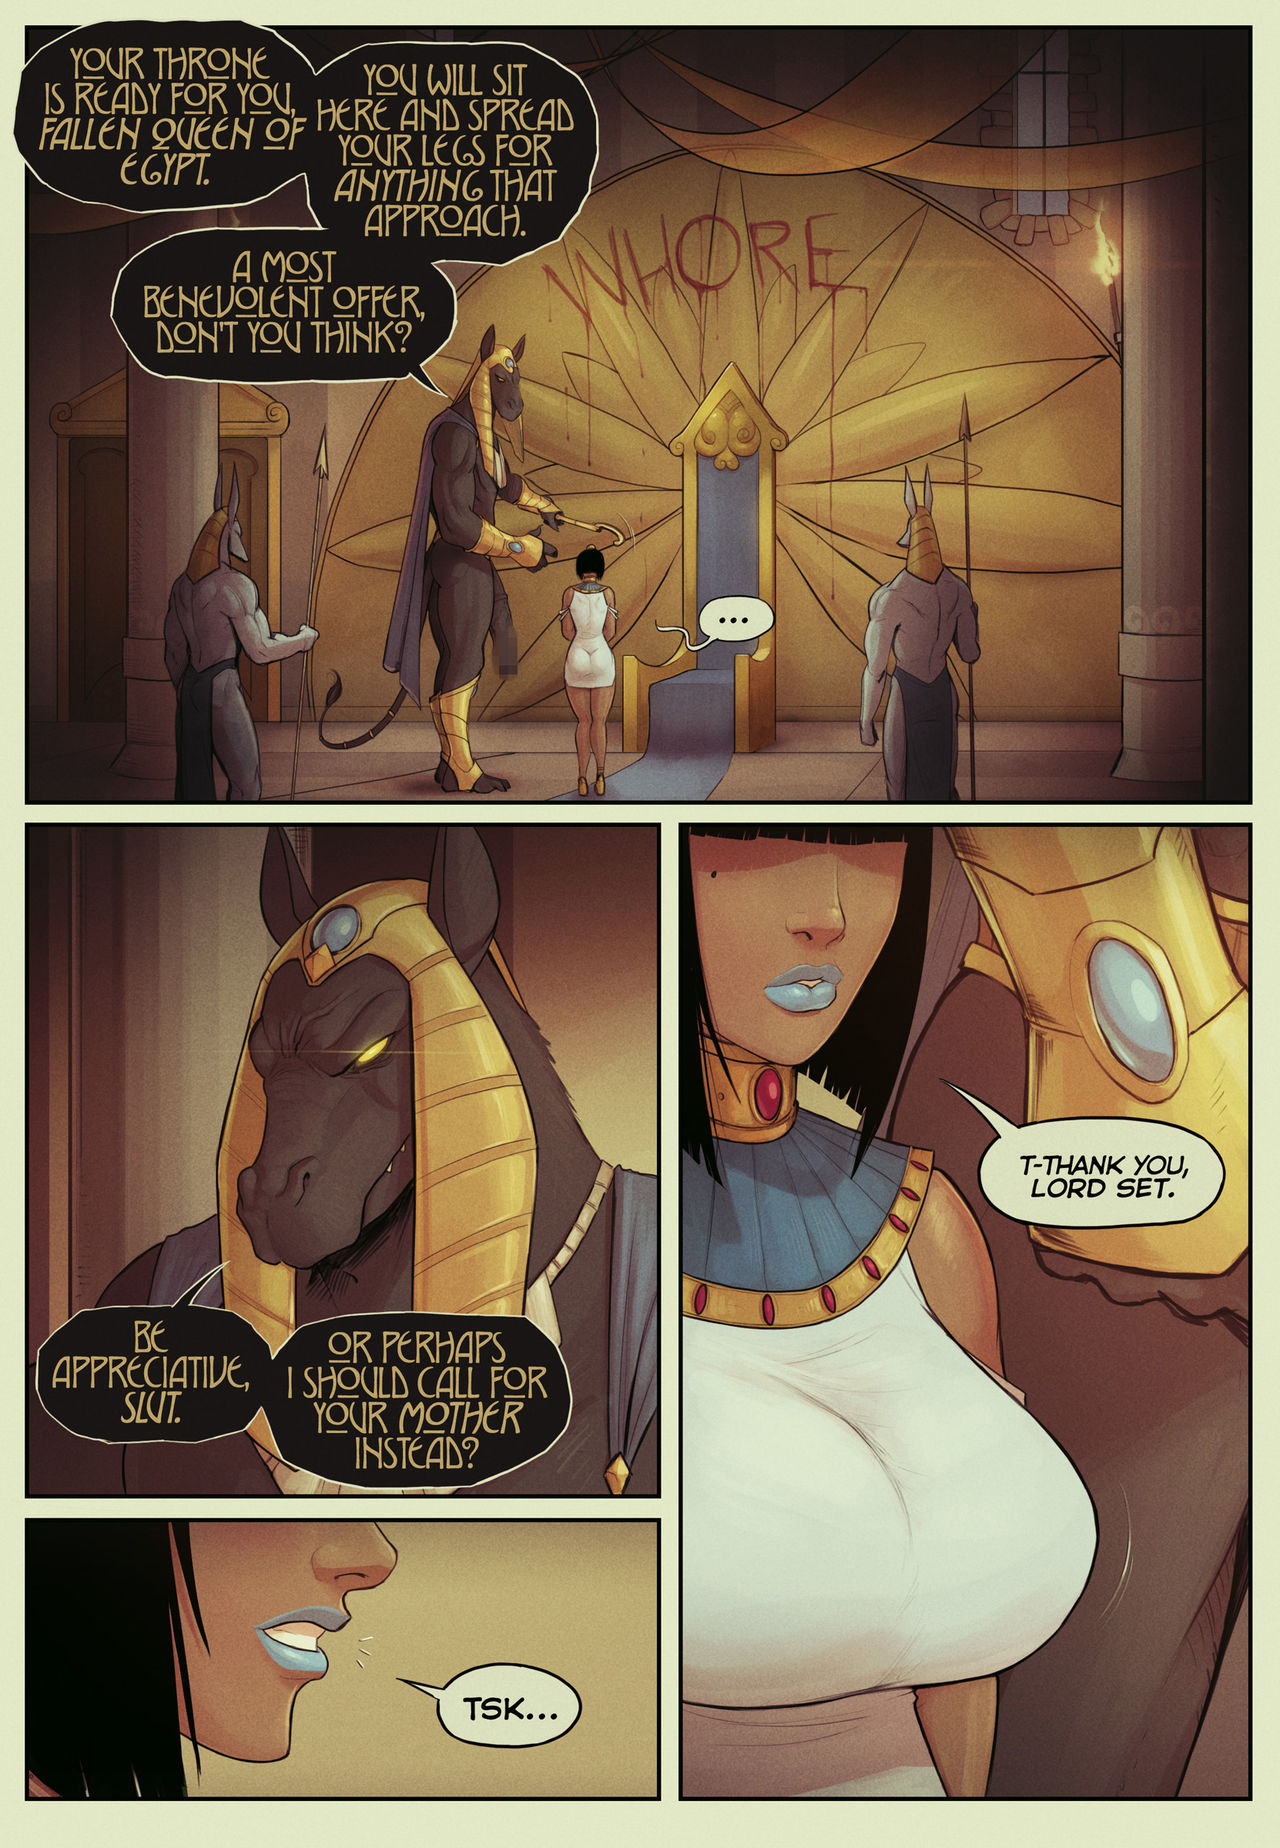 Legend of Queen Opala - In the Shadow of Anubis 3 Tales of Opala Chapter On...